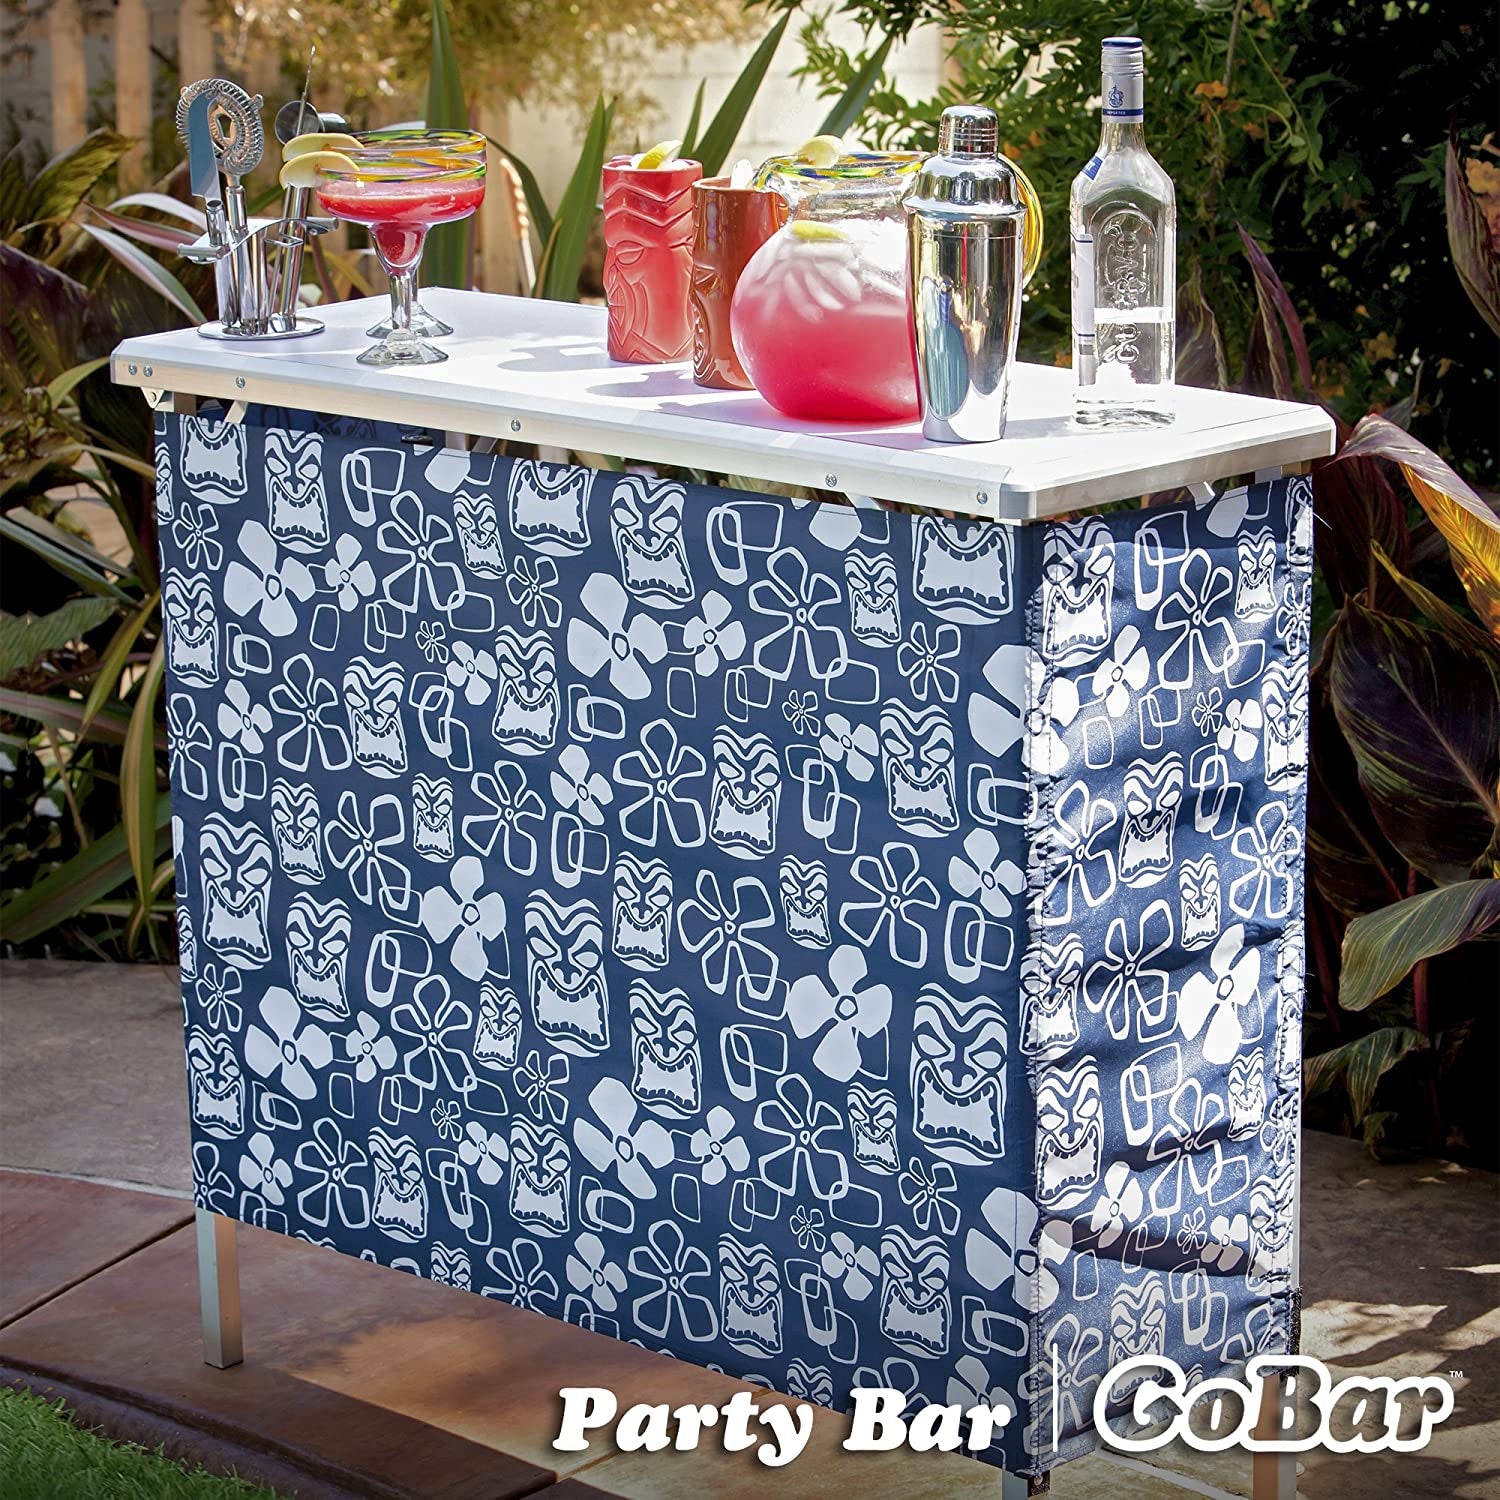 Gobar Portable High Top Bar, Includes 3 Front Skirts and Carrying Case